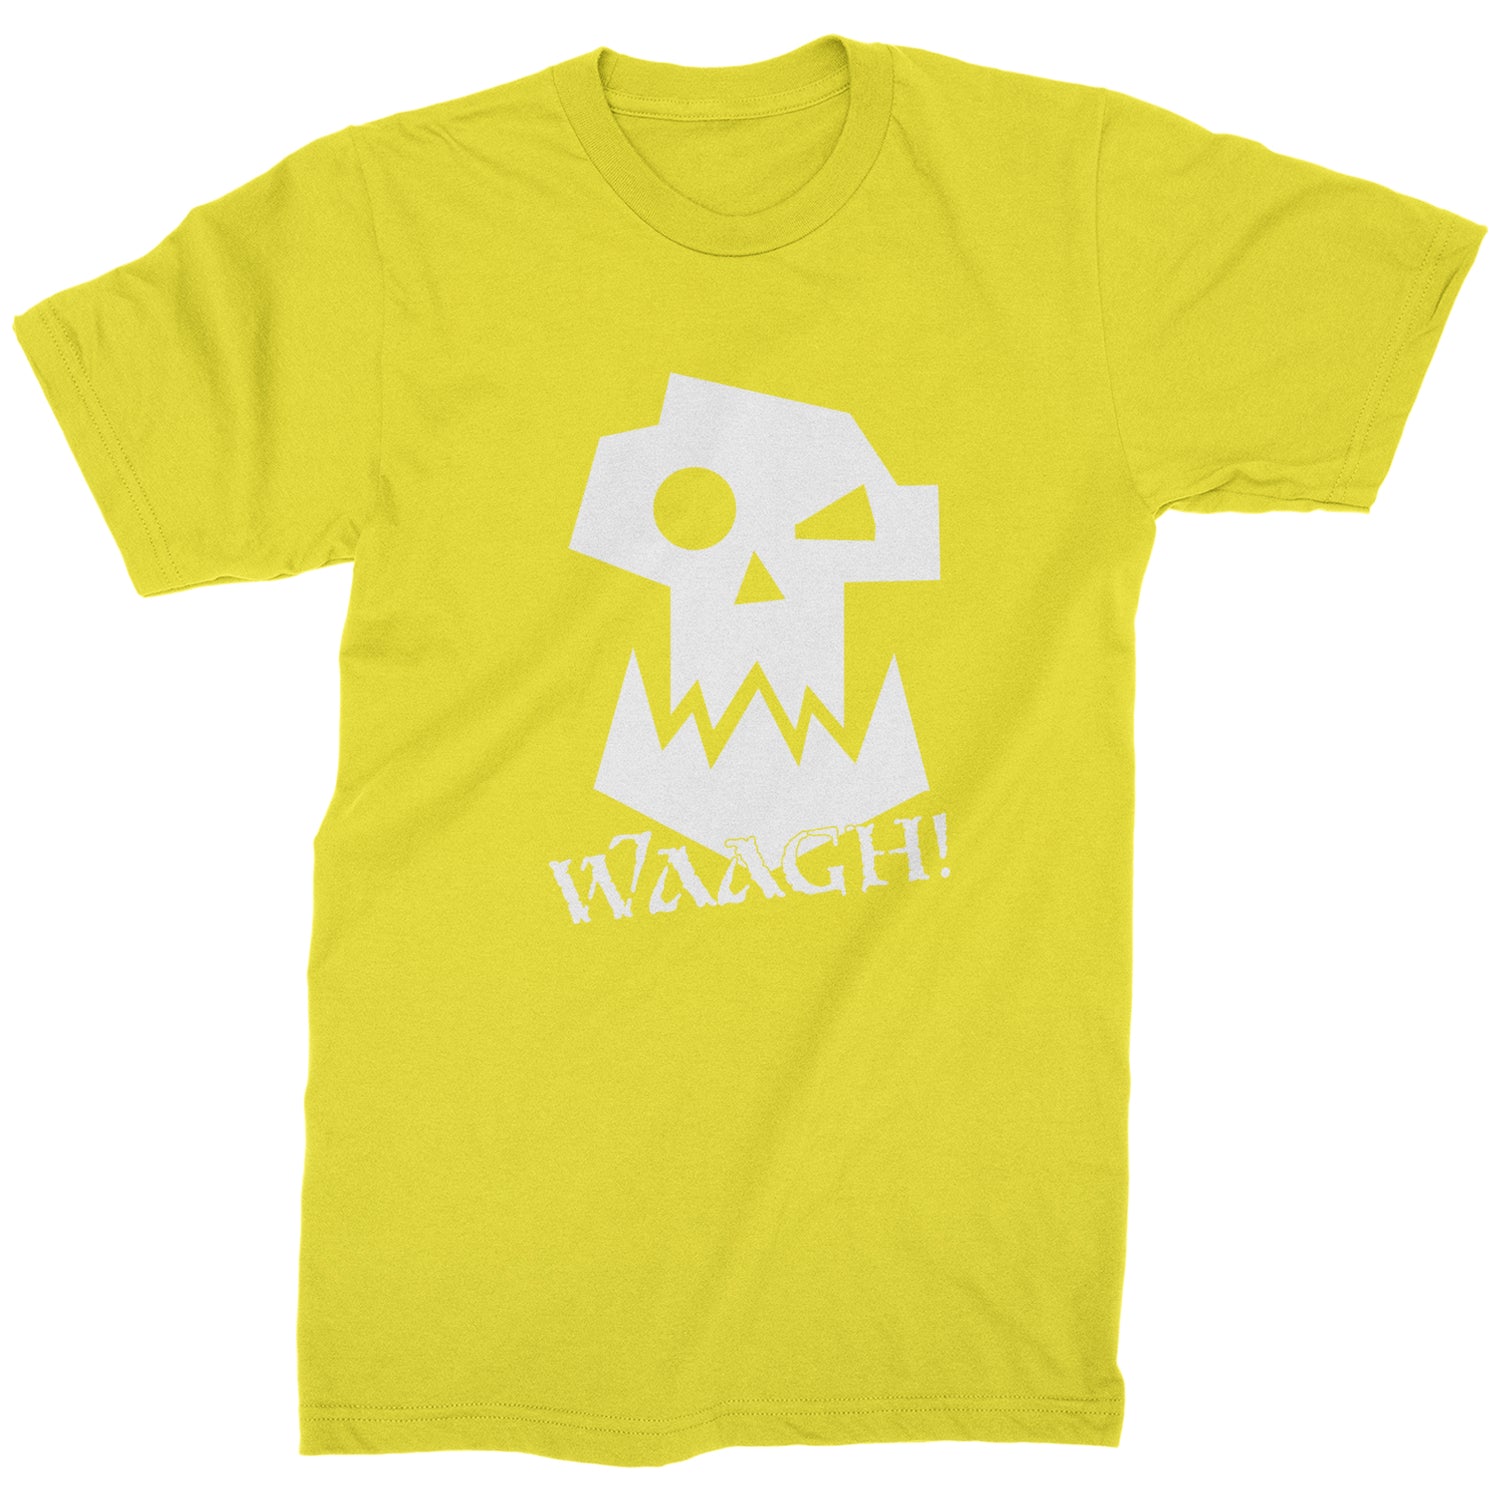 Ork Miniature Tabletop Wargaming Waagh Mens T-shirt #expressiontees by Expression Tees